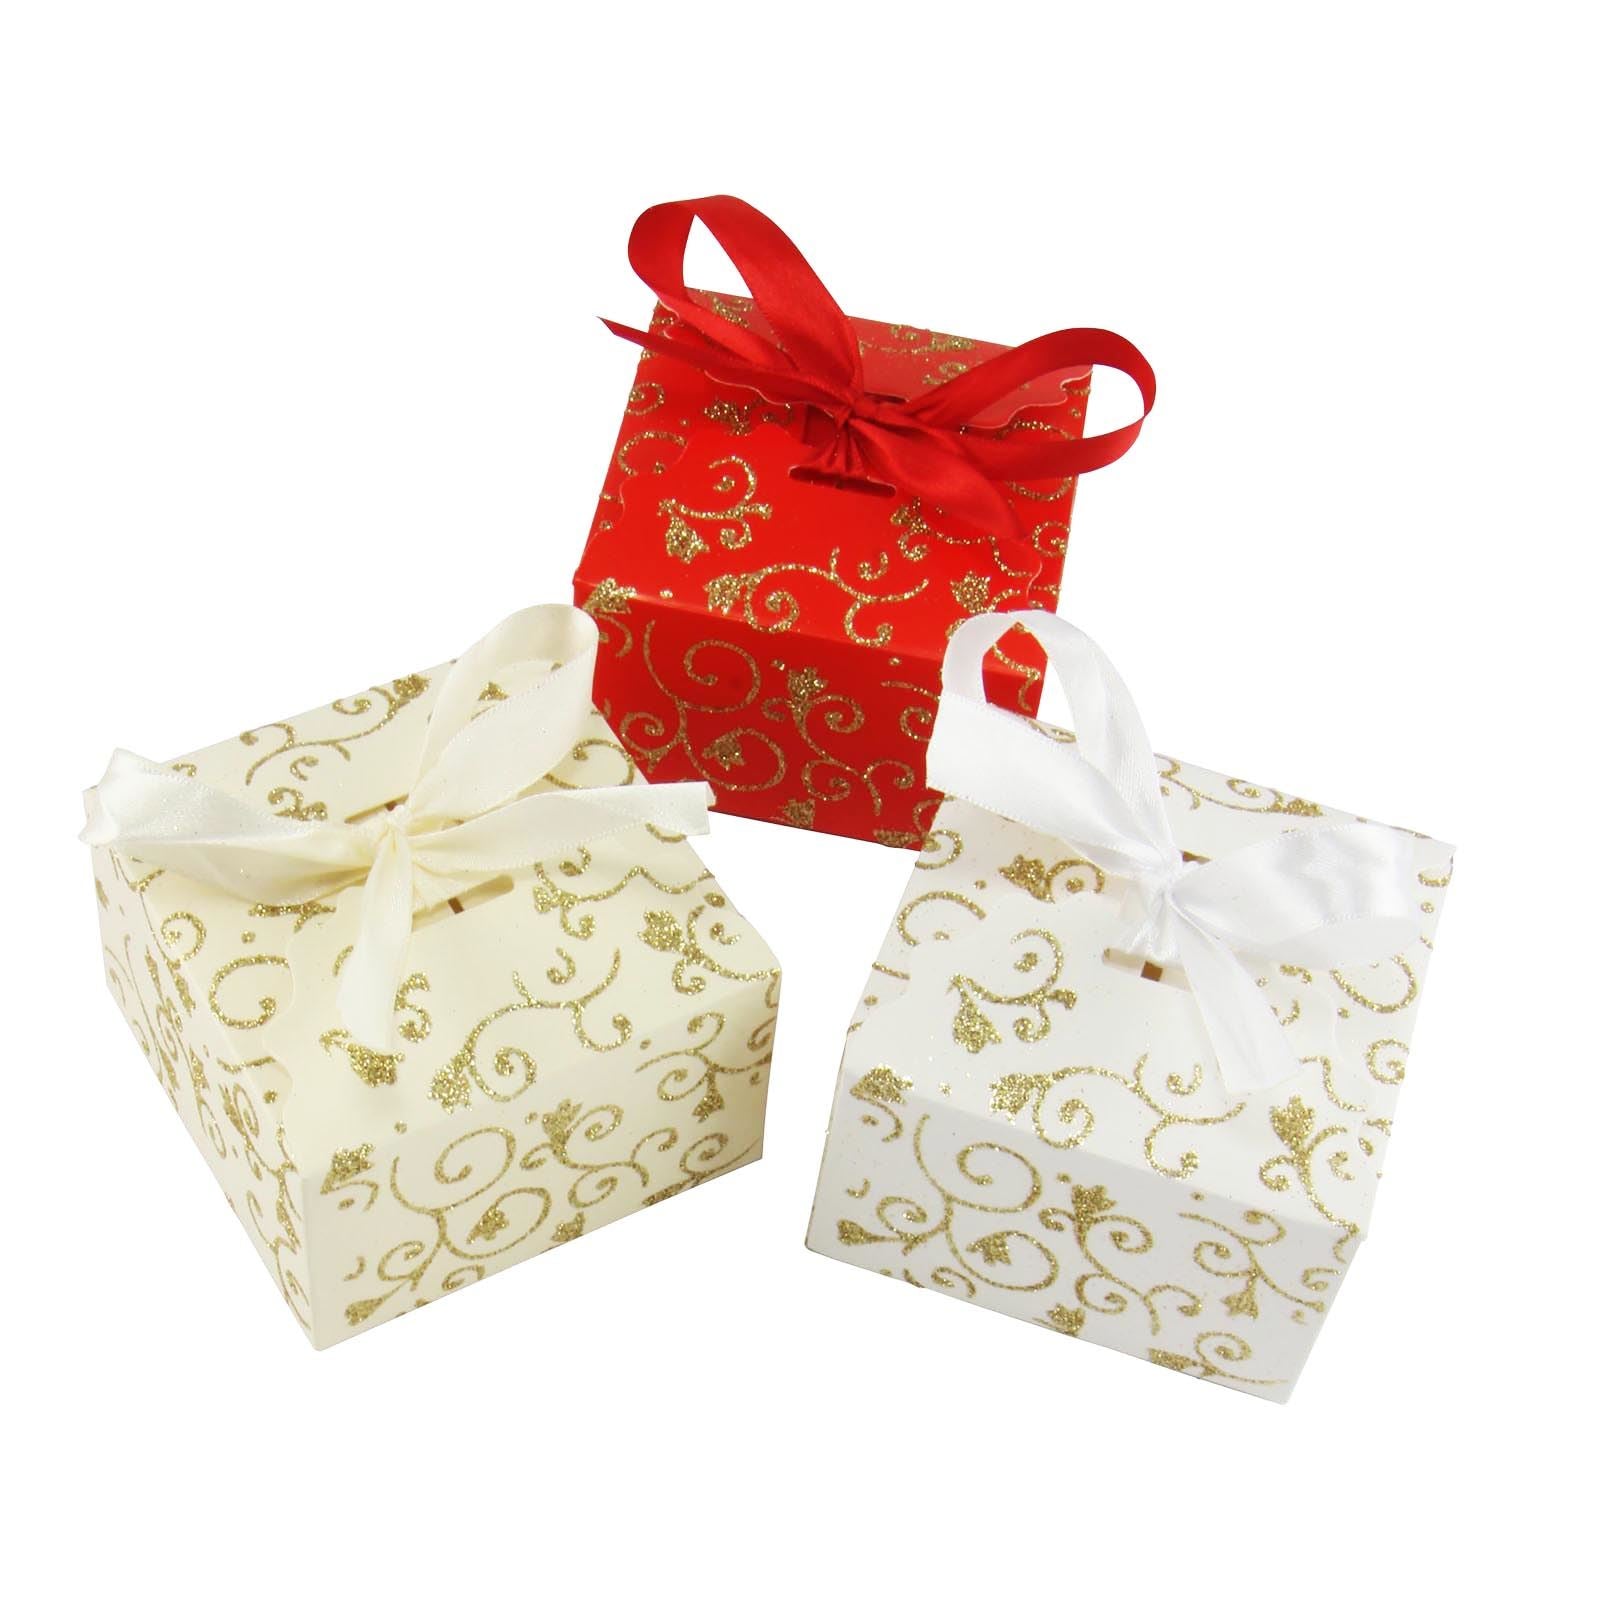 Large Glitter Swirl Favour Boxes with Ribbon